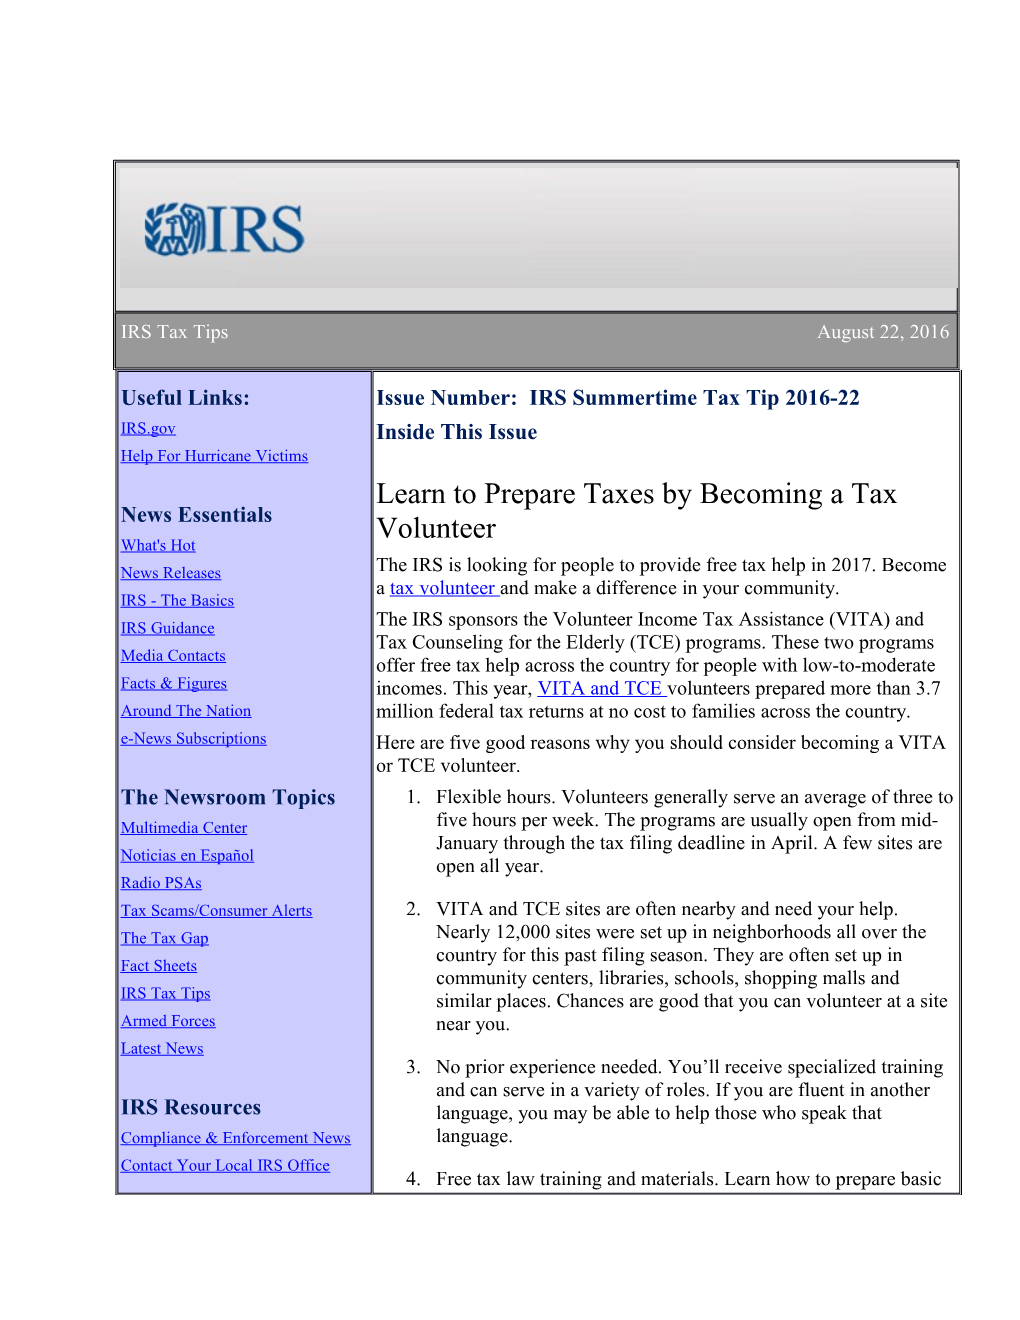 Issue Number:IRS Summertime Tax Tip 2016-22